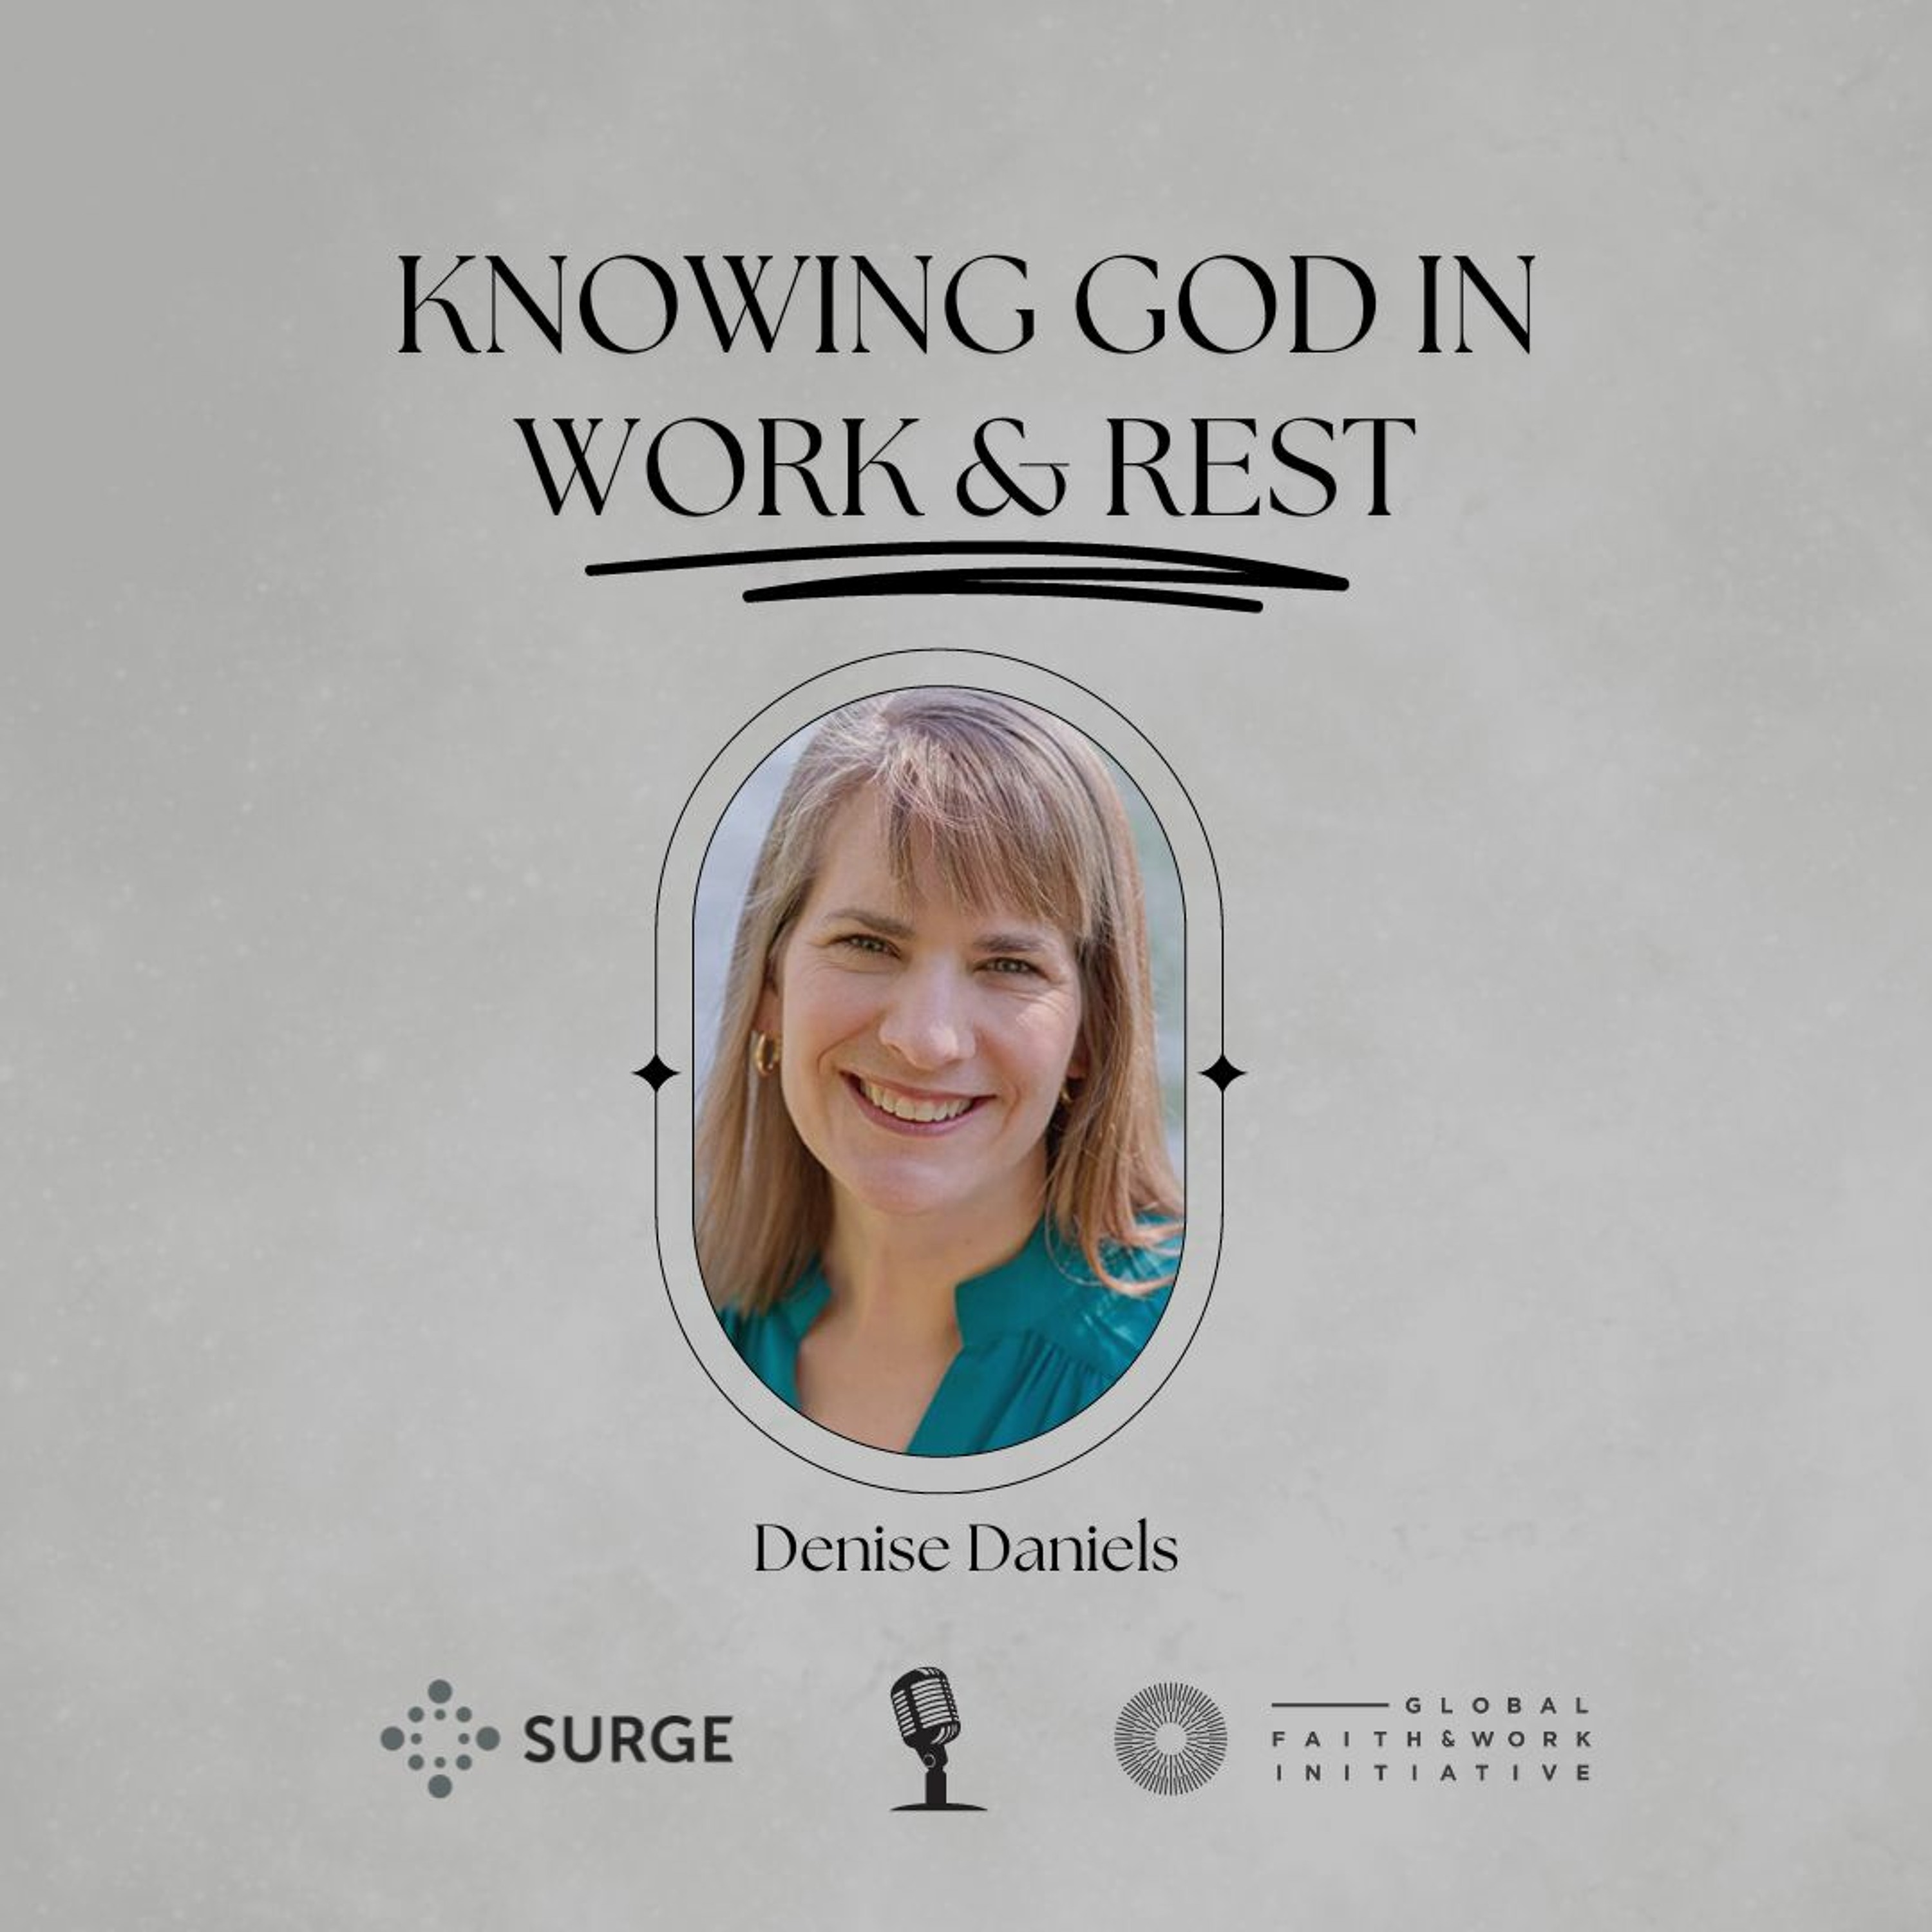 Knowing God in Work & Rest 02: Working in the Presence of God